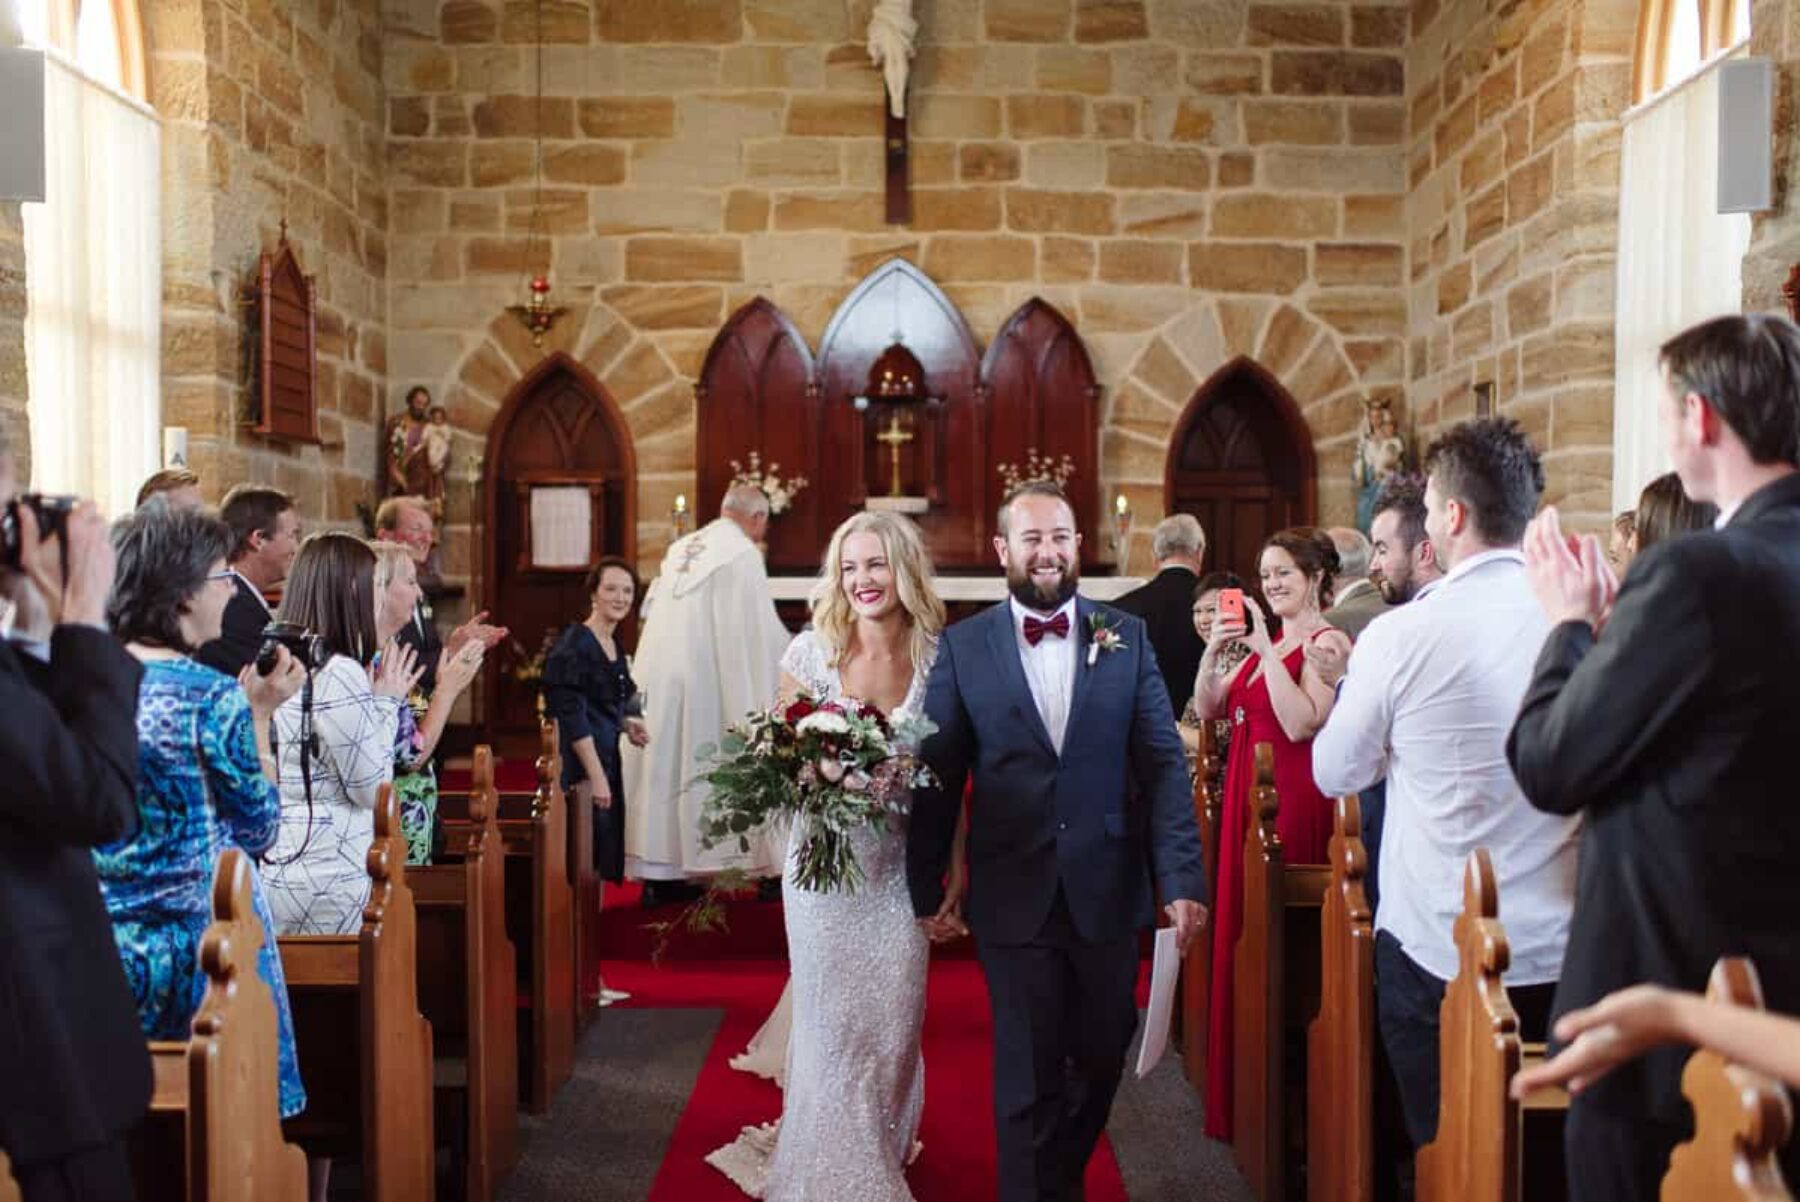 Terrigal wedding at Holy Cross Church / Photography by Keelan Christopher